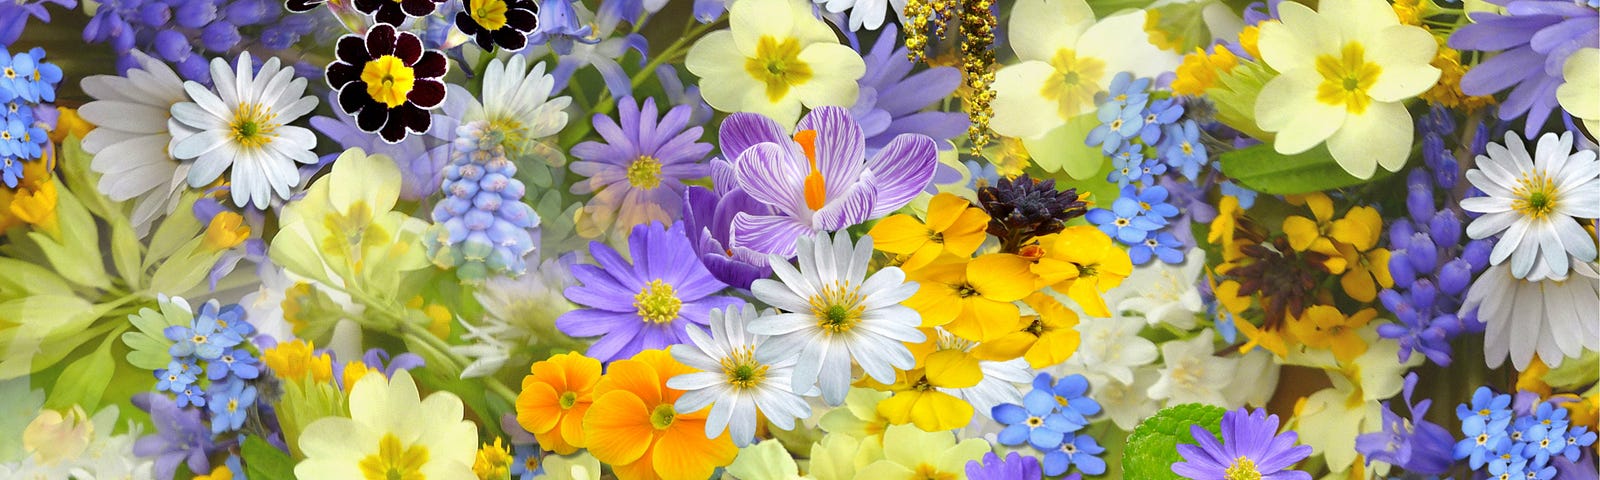 An image of several different types of beautifully colored flowers